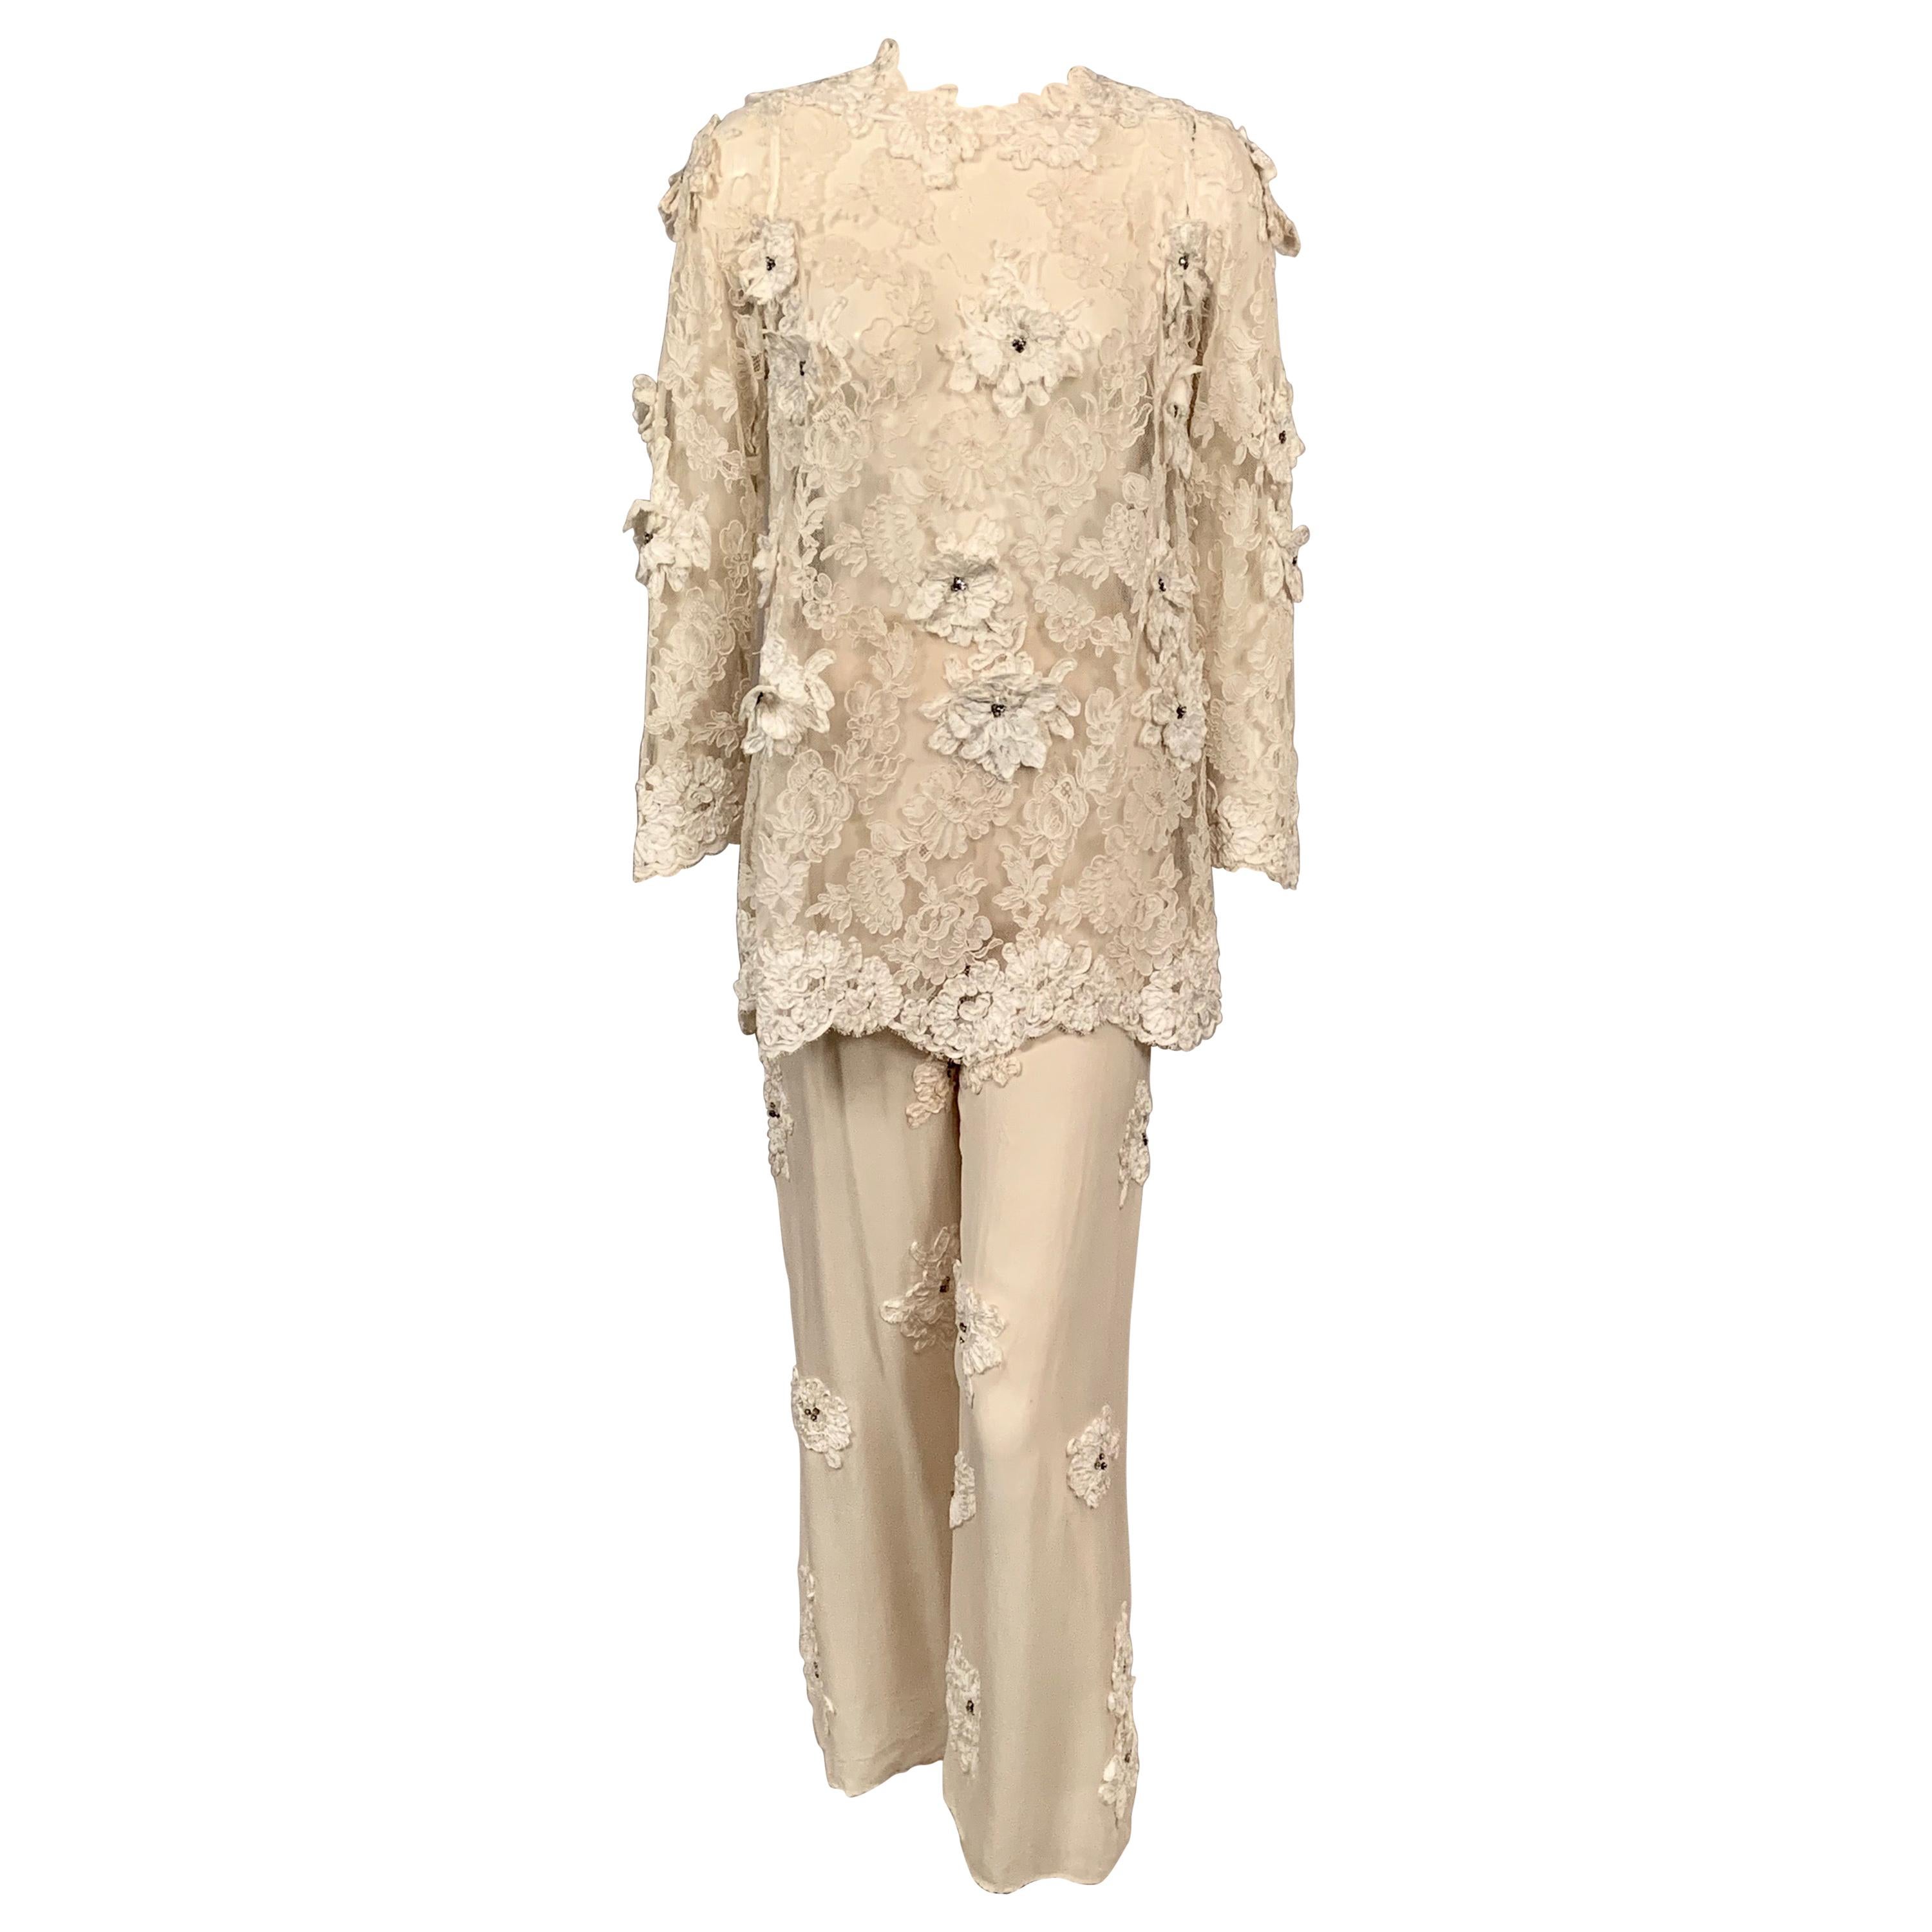 1970's Ivory Lace Tunic and Chiffon Pants with Ribbon and Rhinestone Appliques